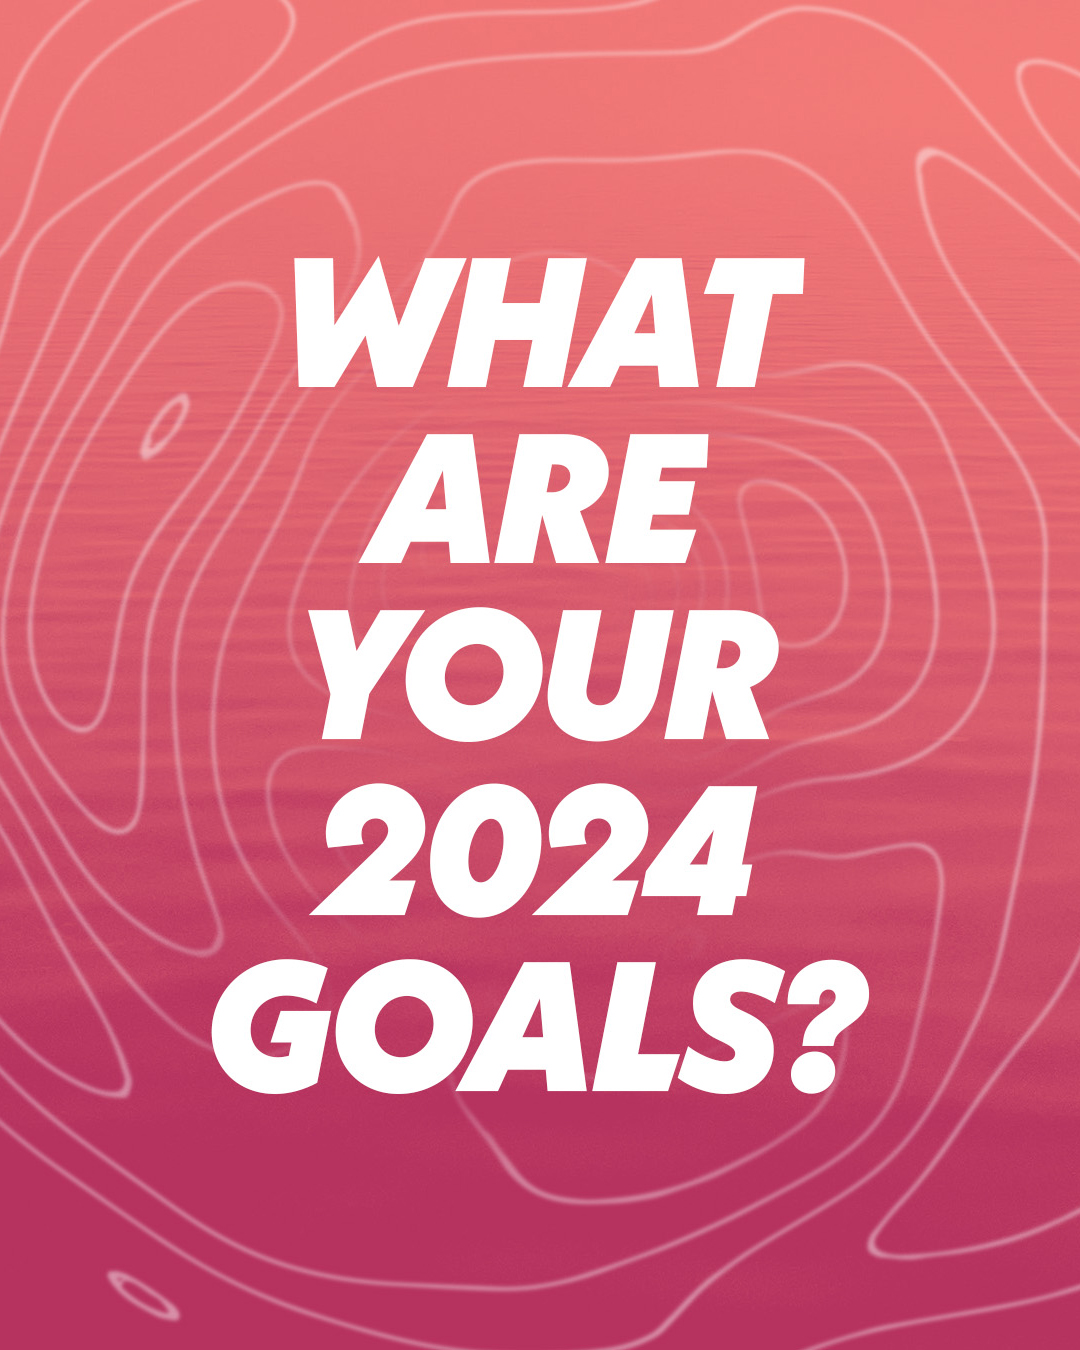 What are your 2024 goals?